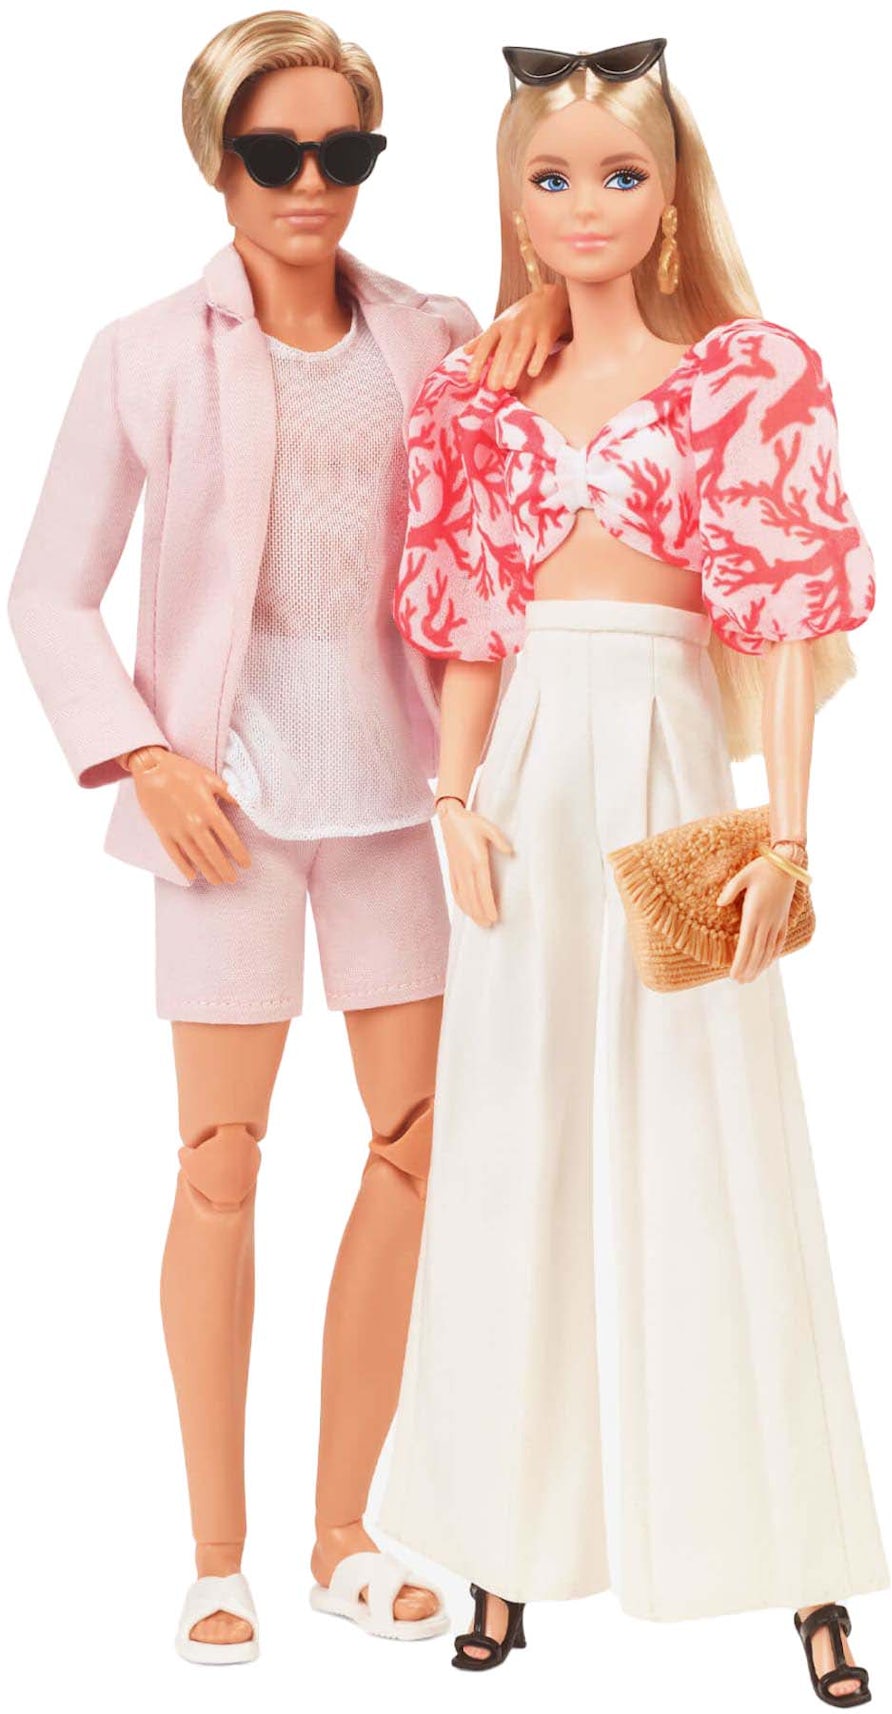 Barbie Signature Pink Collection Doll 2